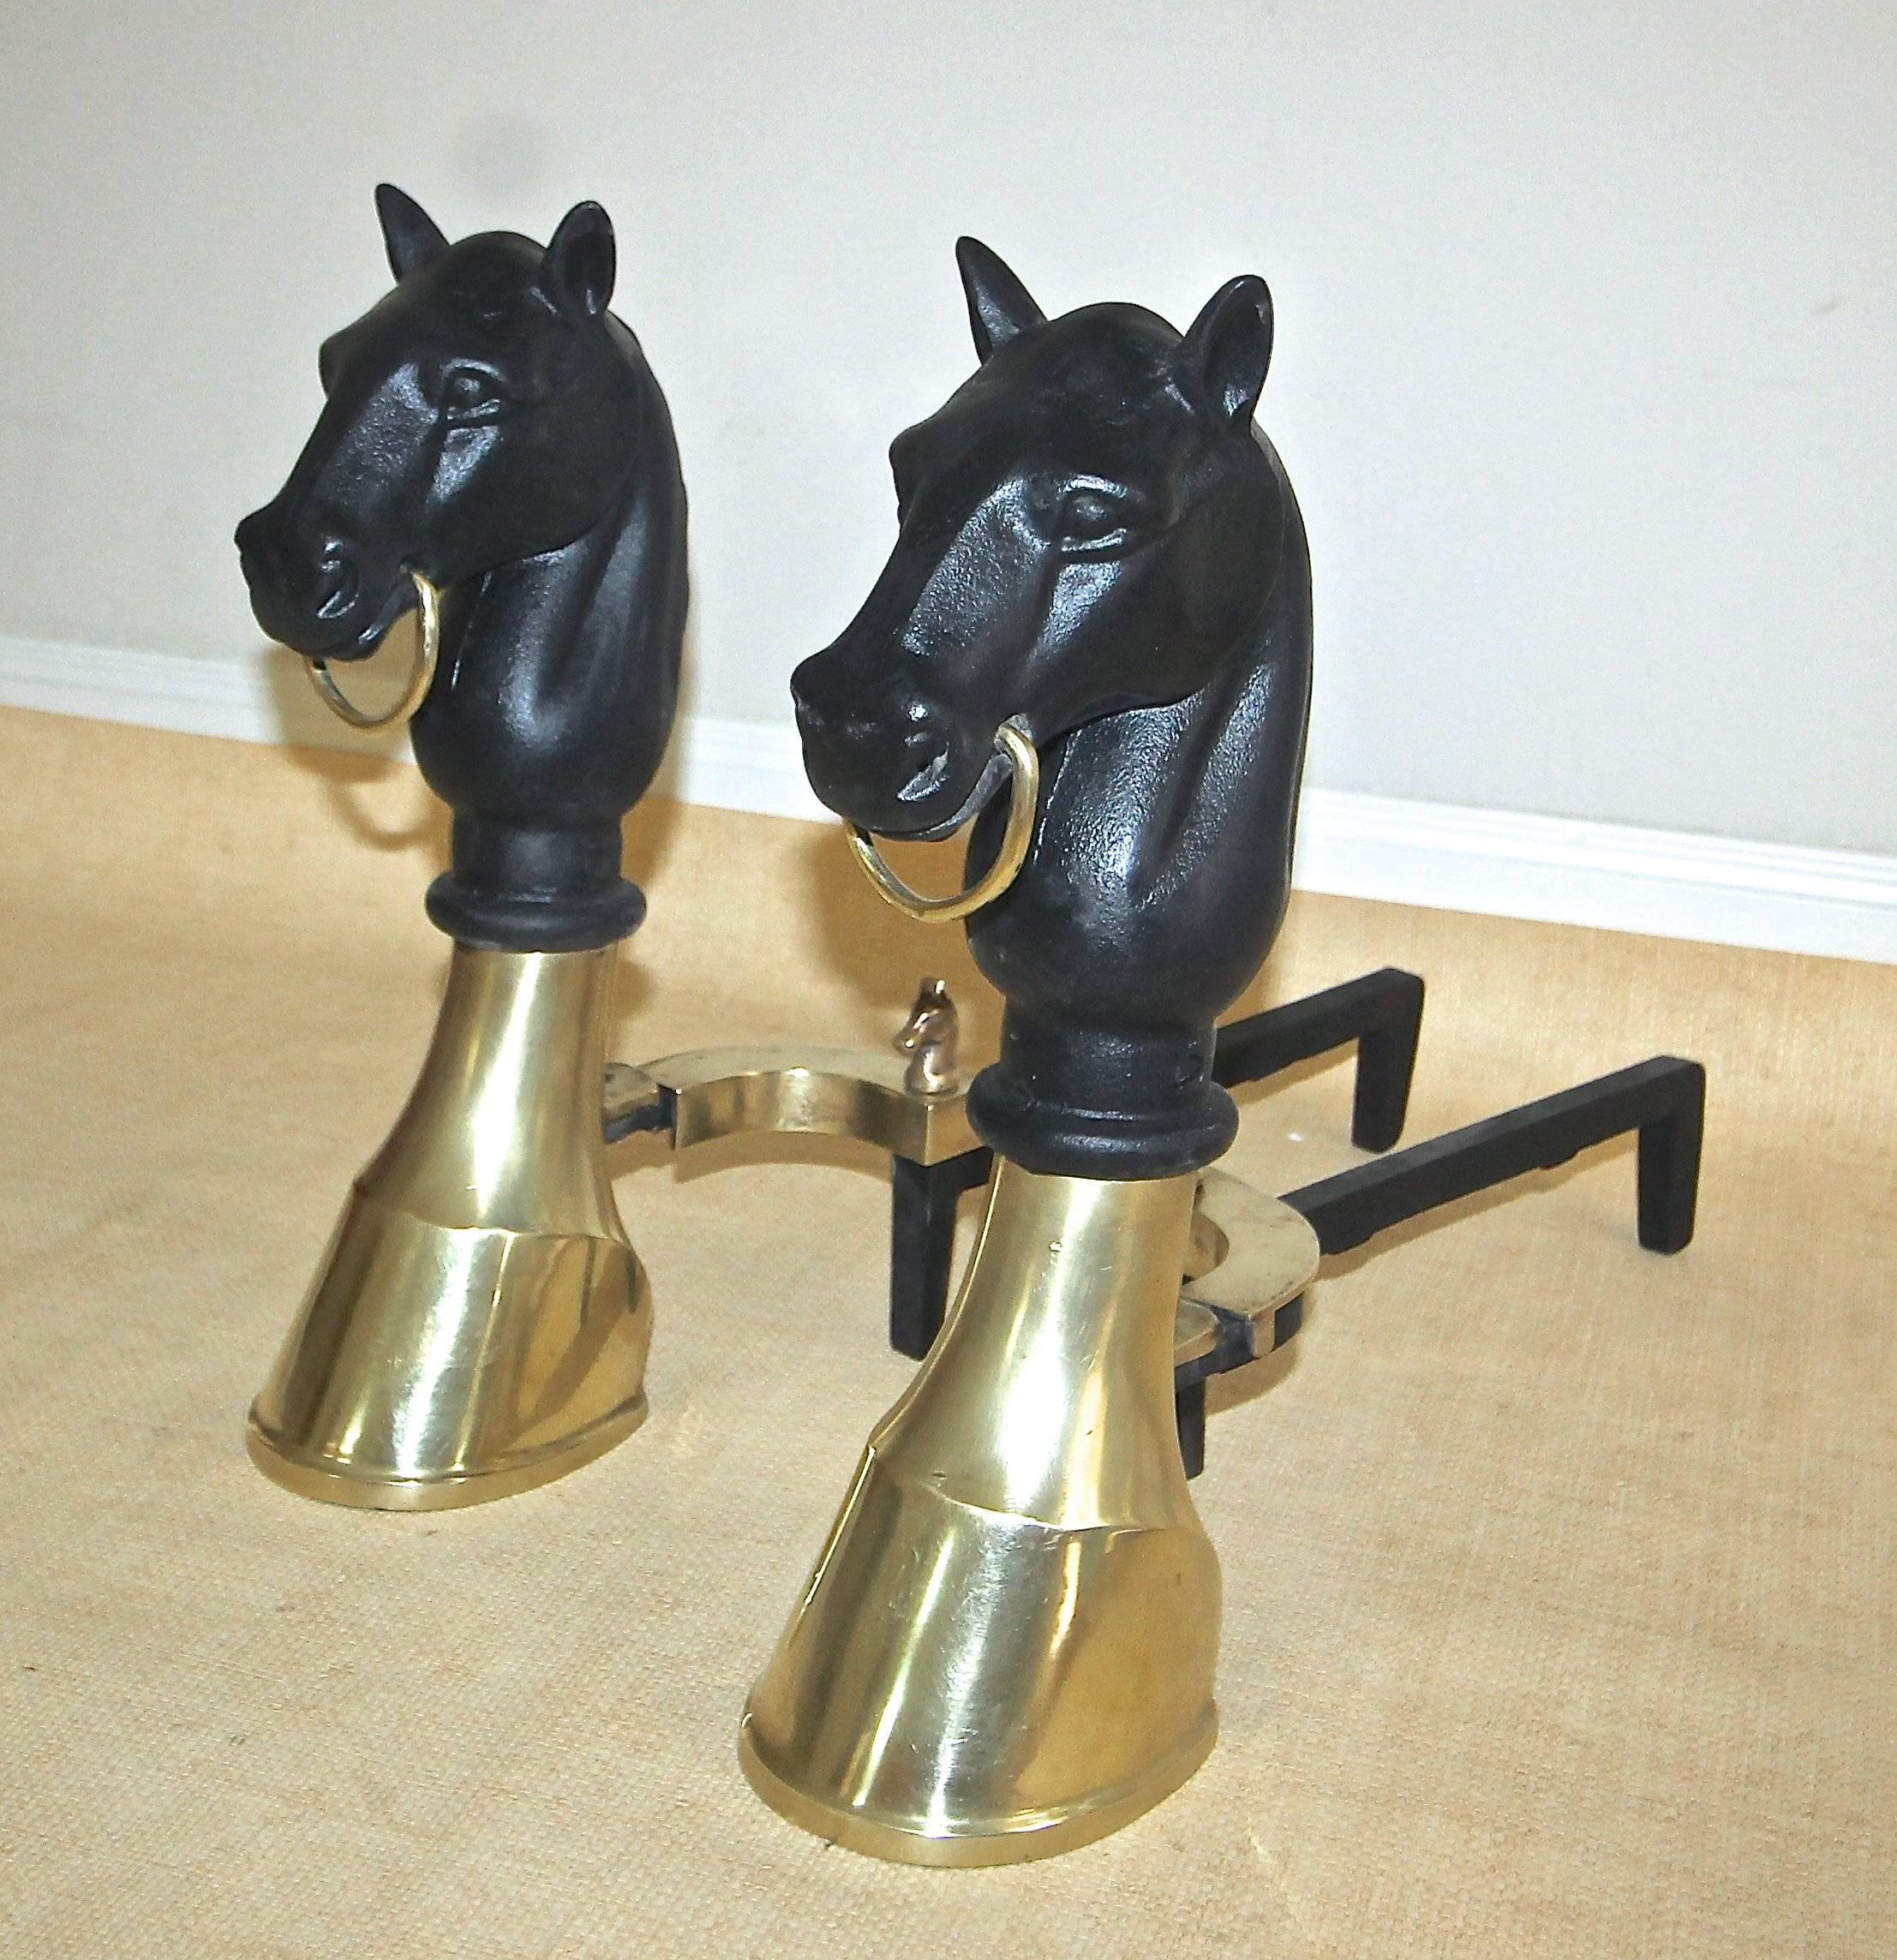 A very handsome pair of brass and cast iron andirons with a horse head and hoof motif and horse head finials at the base.